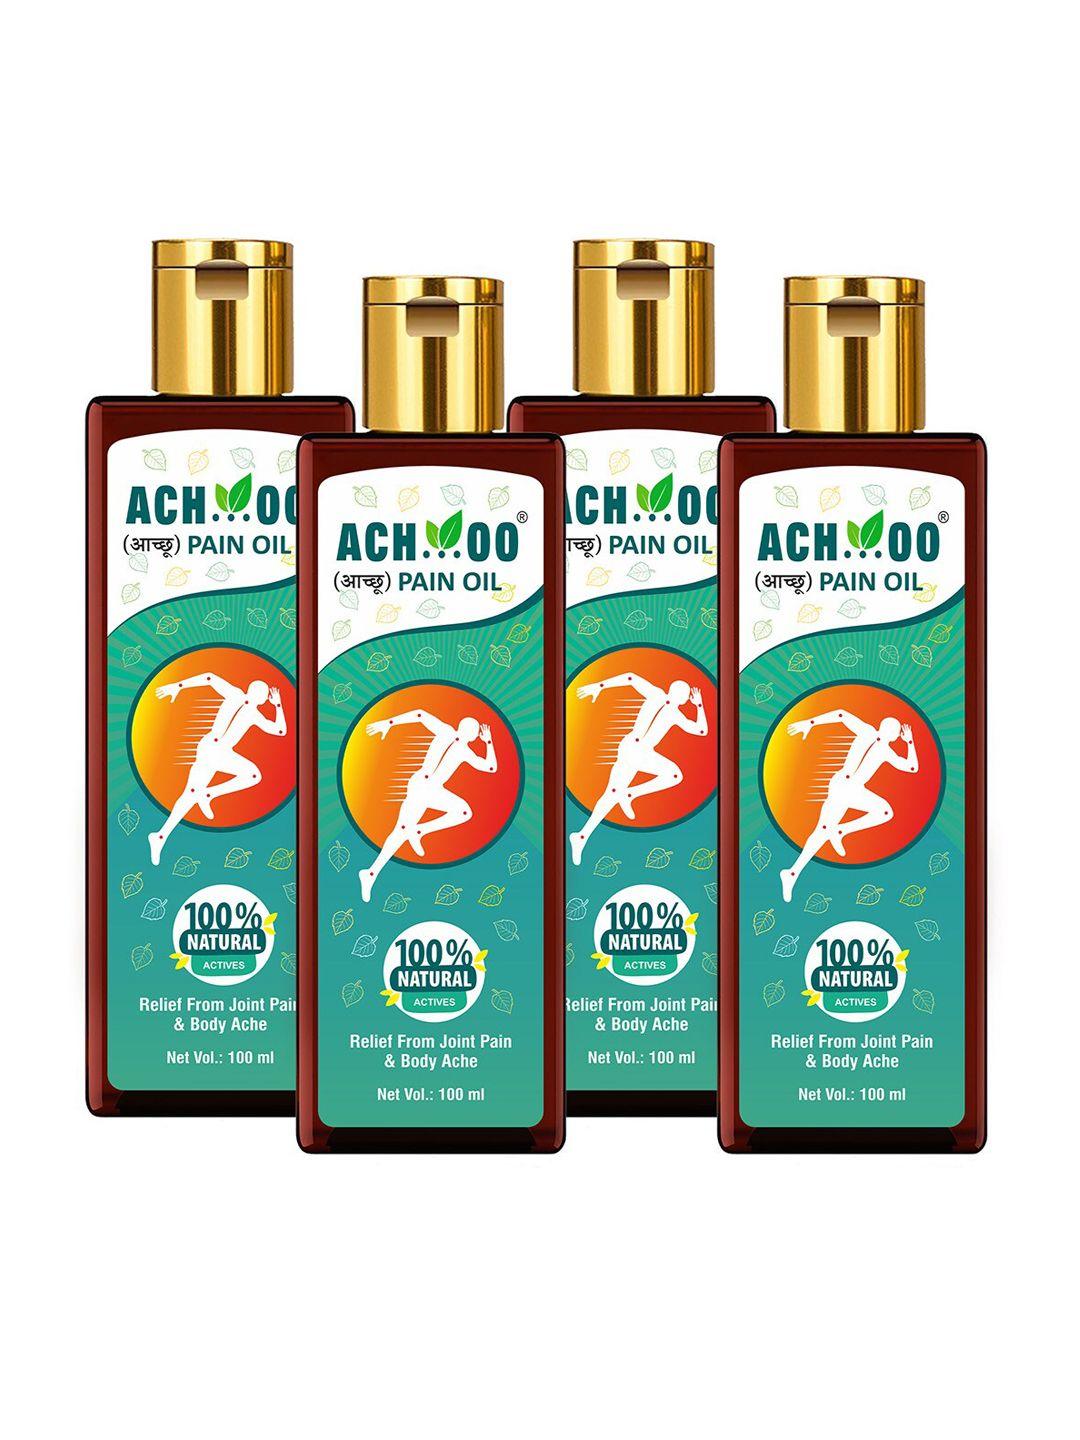 achoo set of 4 pain oil to relief from joint pains & body ache - 100 ml each